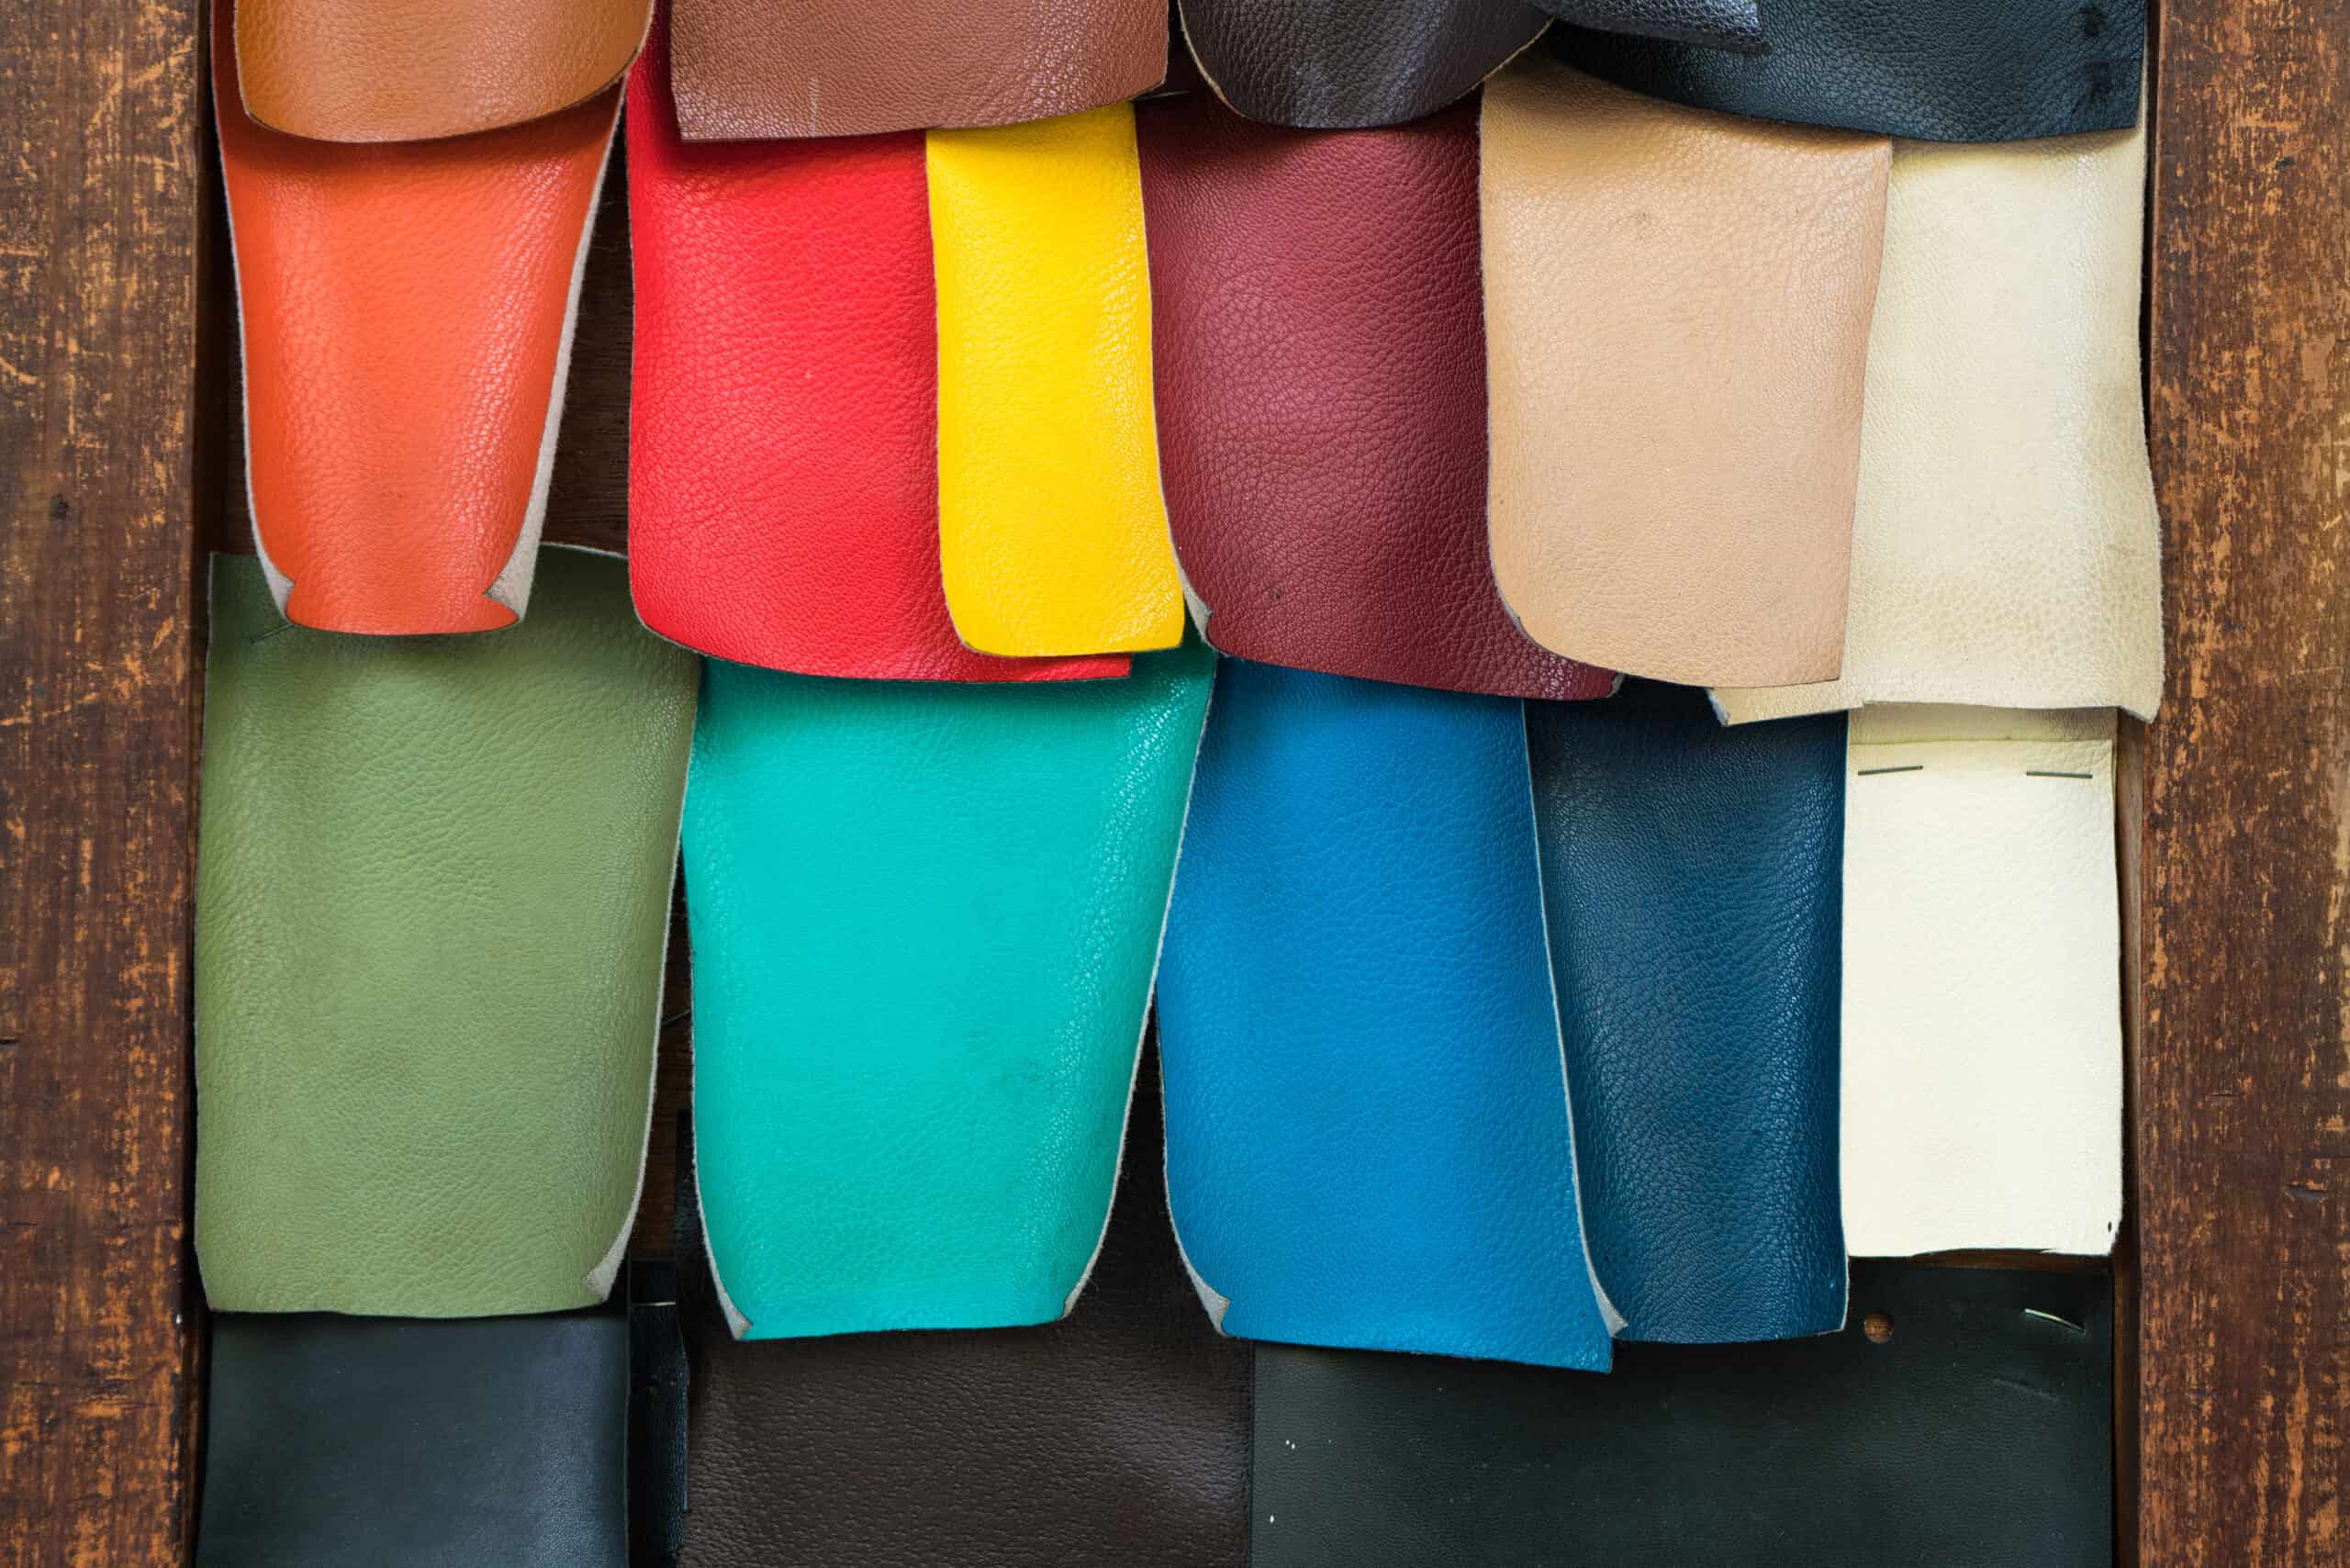 A variety of cruelty-free leather